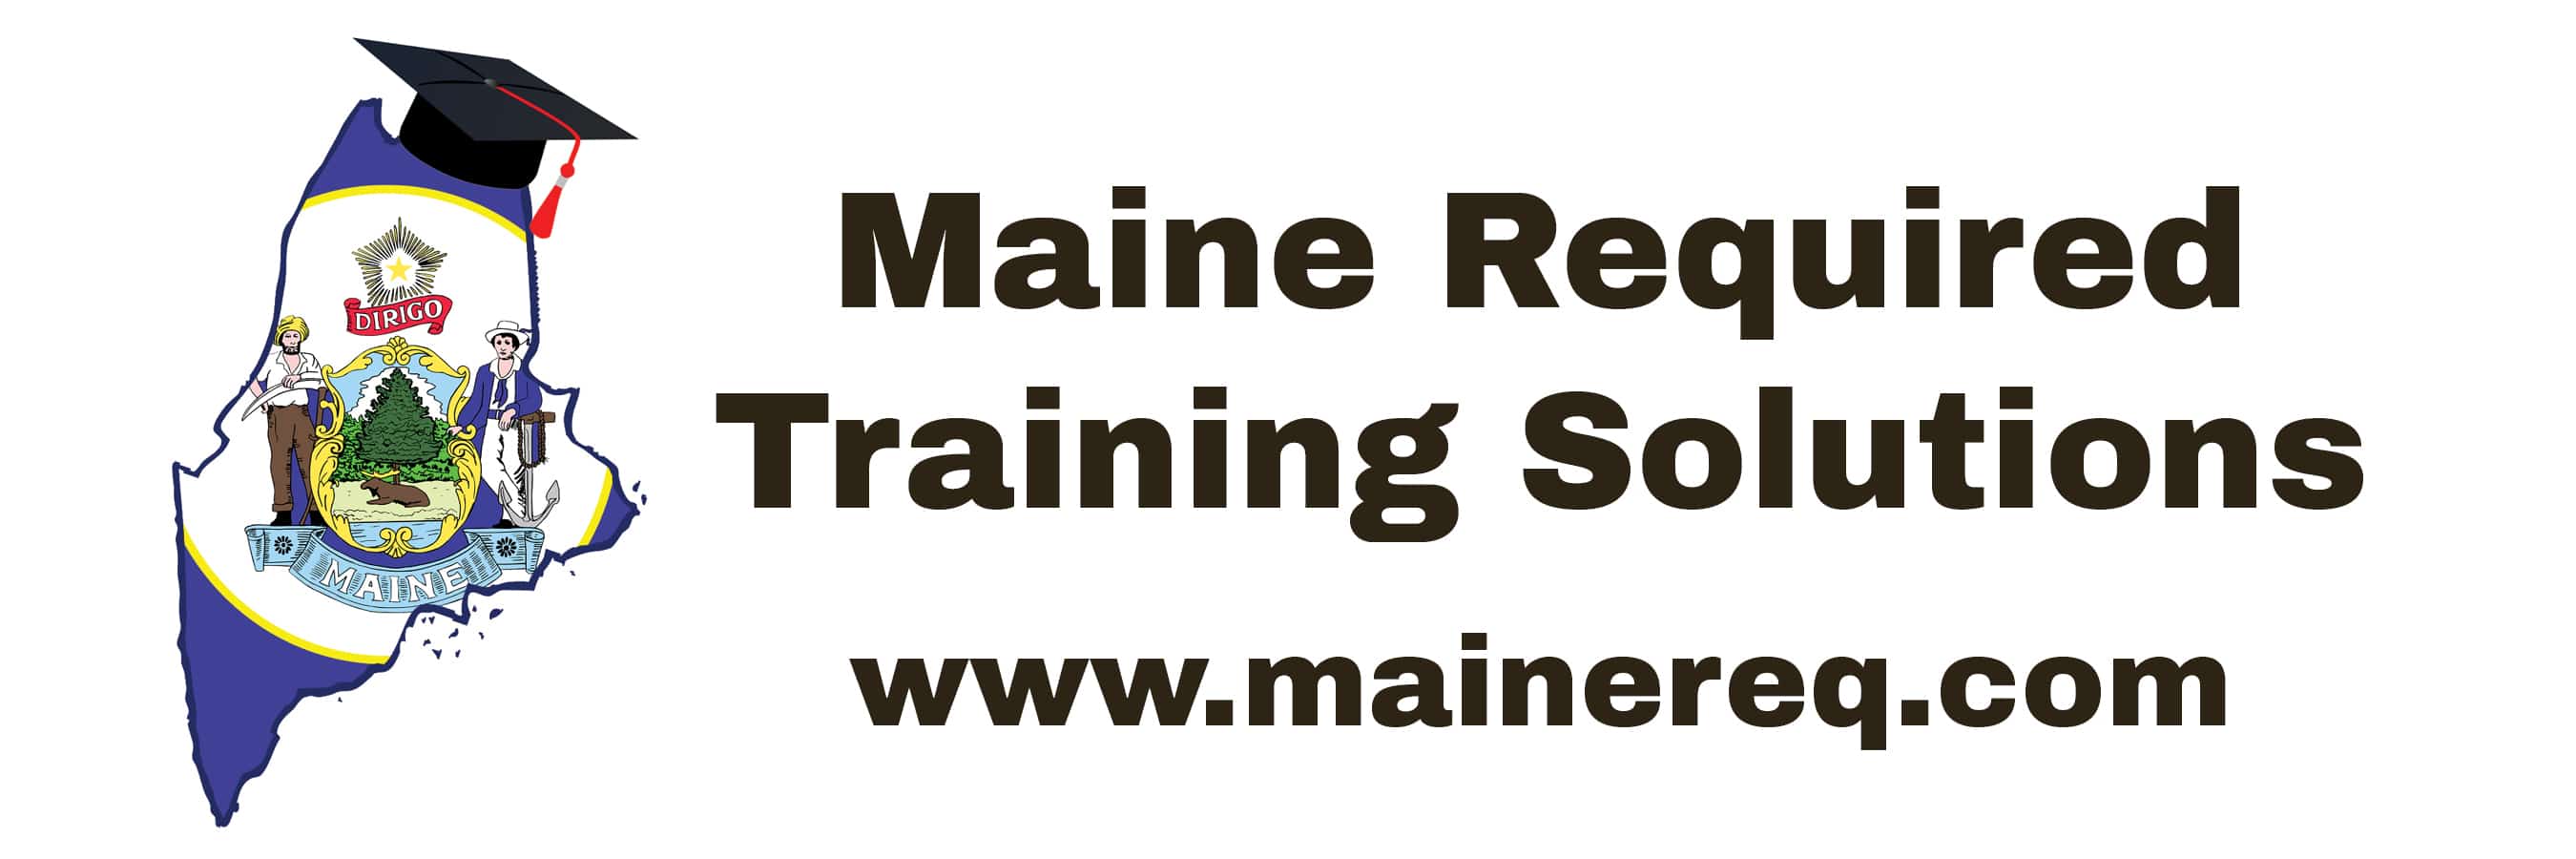 Maine Required Training Solutions